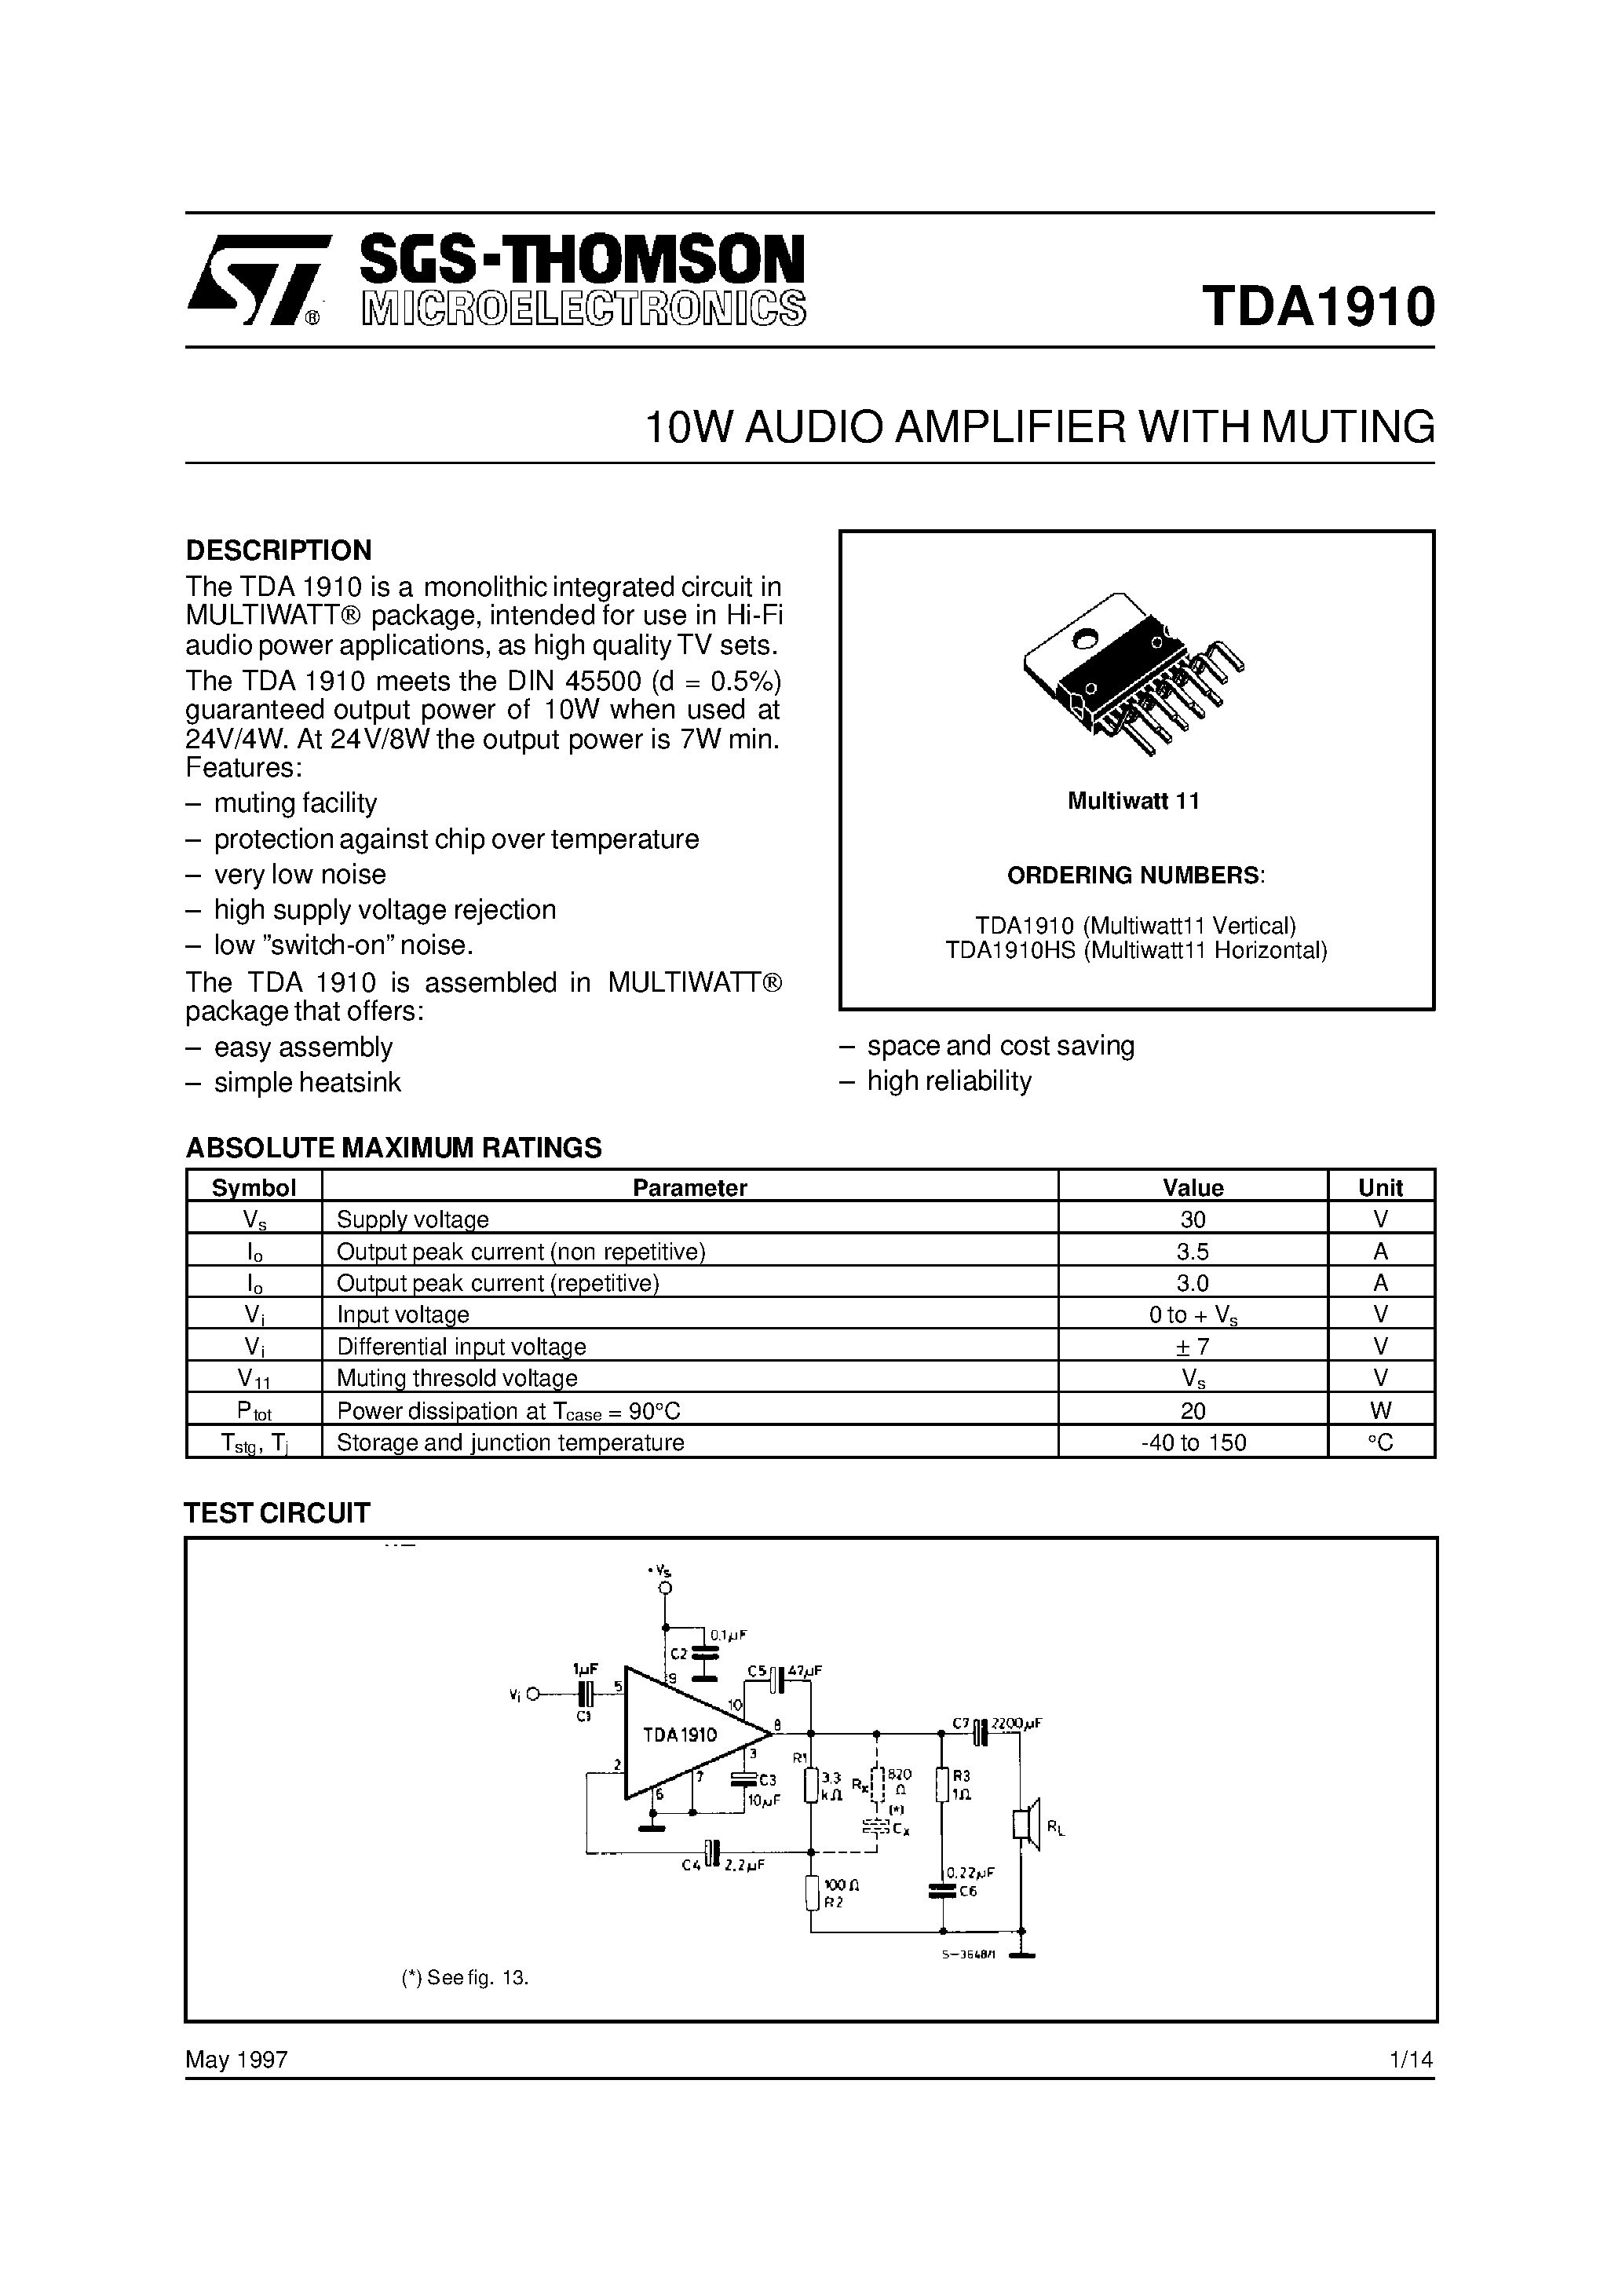 Даташит TDA1910HS - 10W AUDIO AMPLIFIER WITH MUTING страница 1